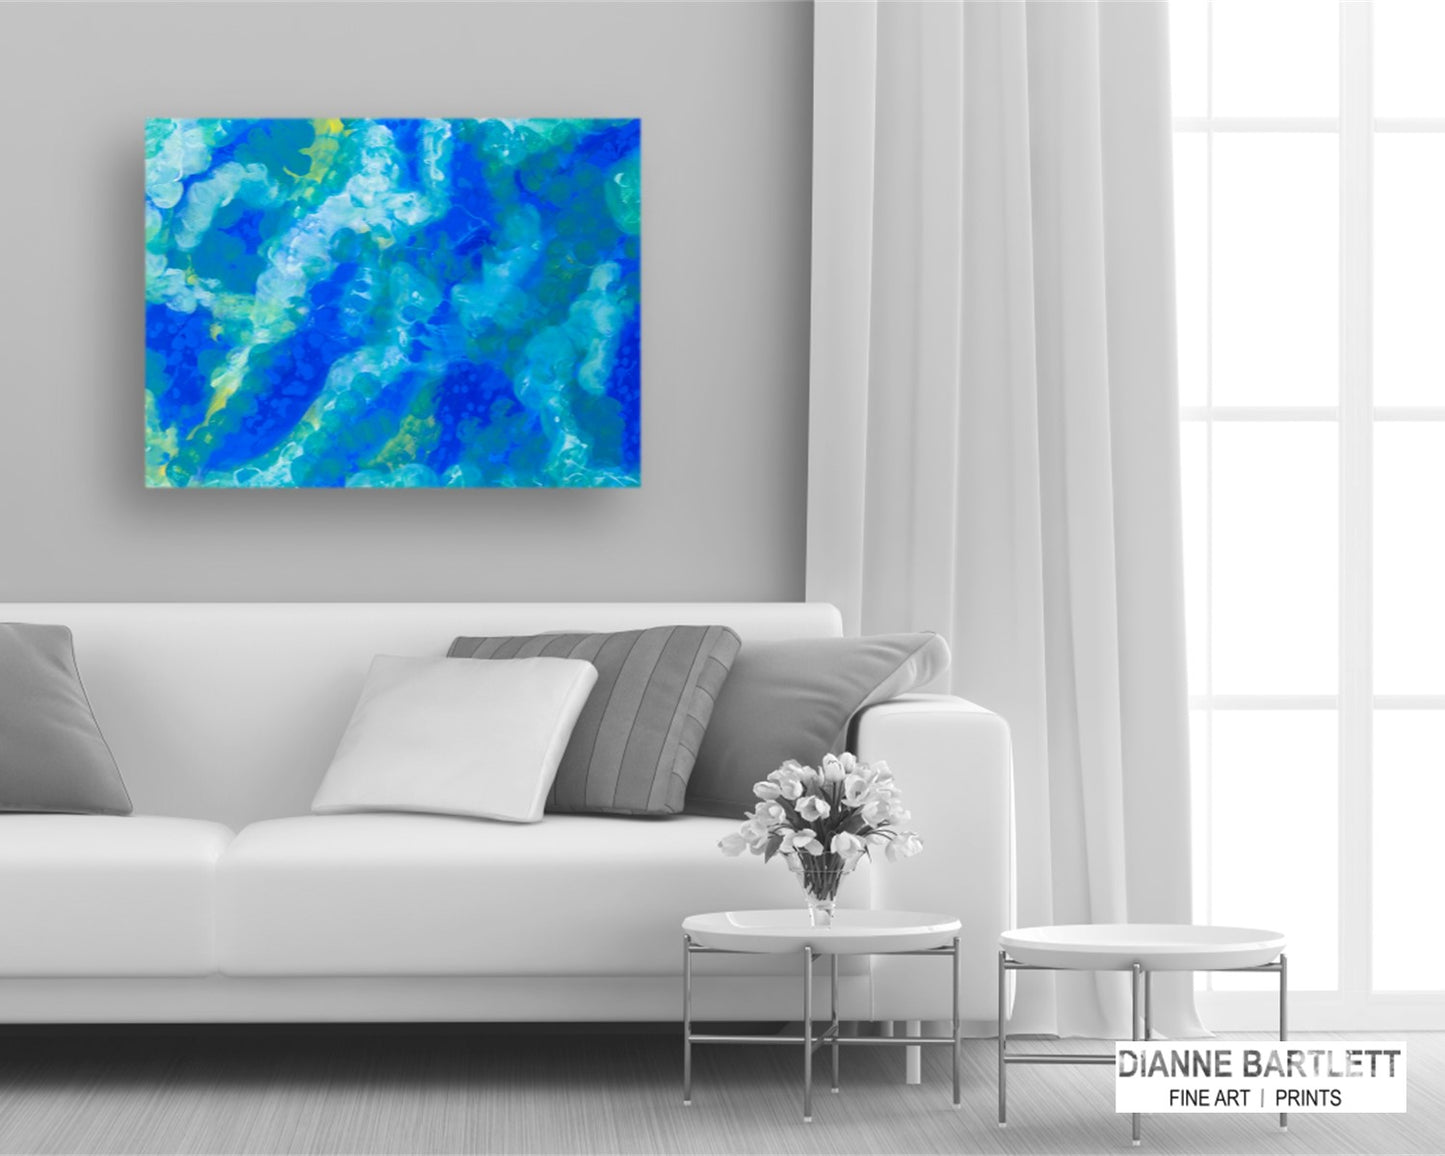 Exiled Essence- Original Abstract Painting in Austin Texas 30" x 40"